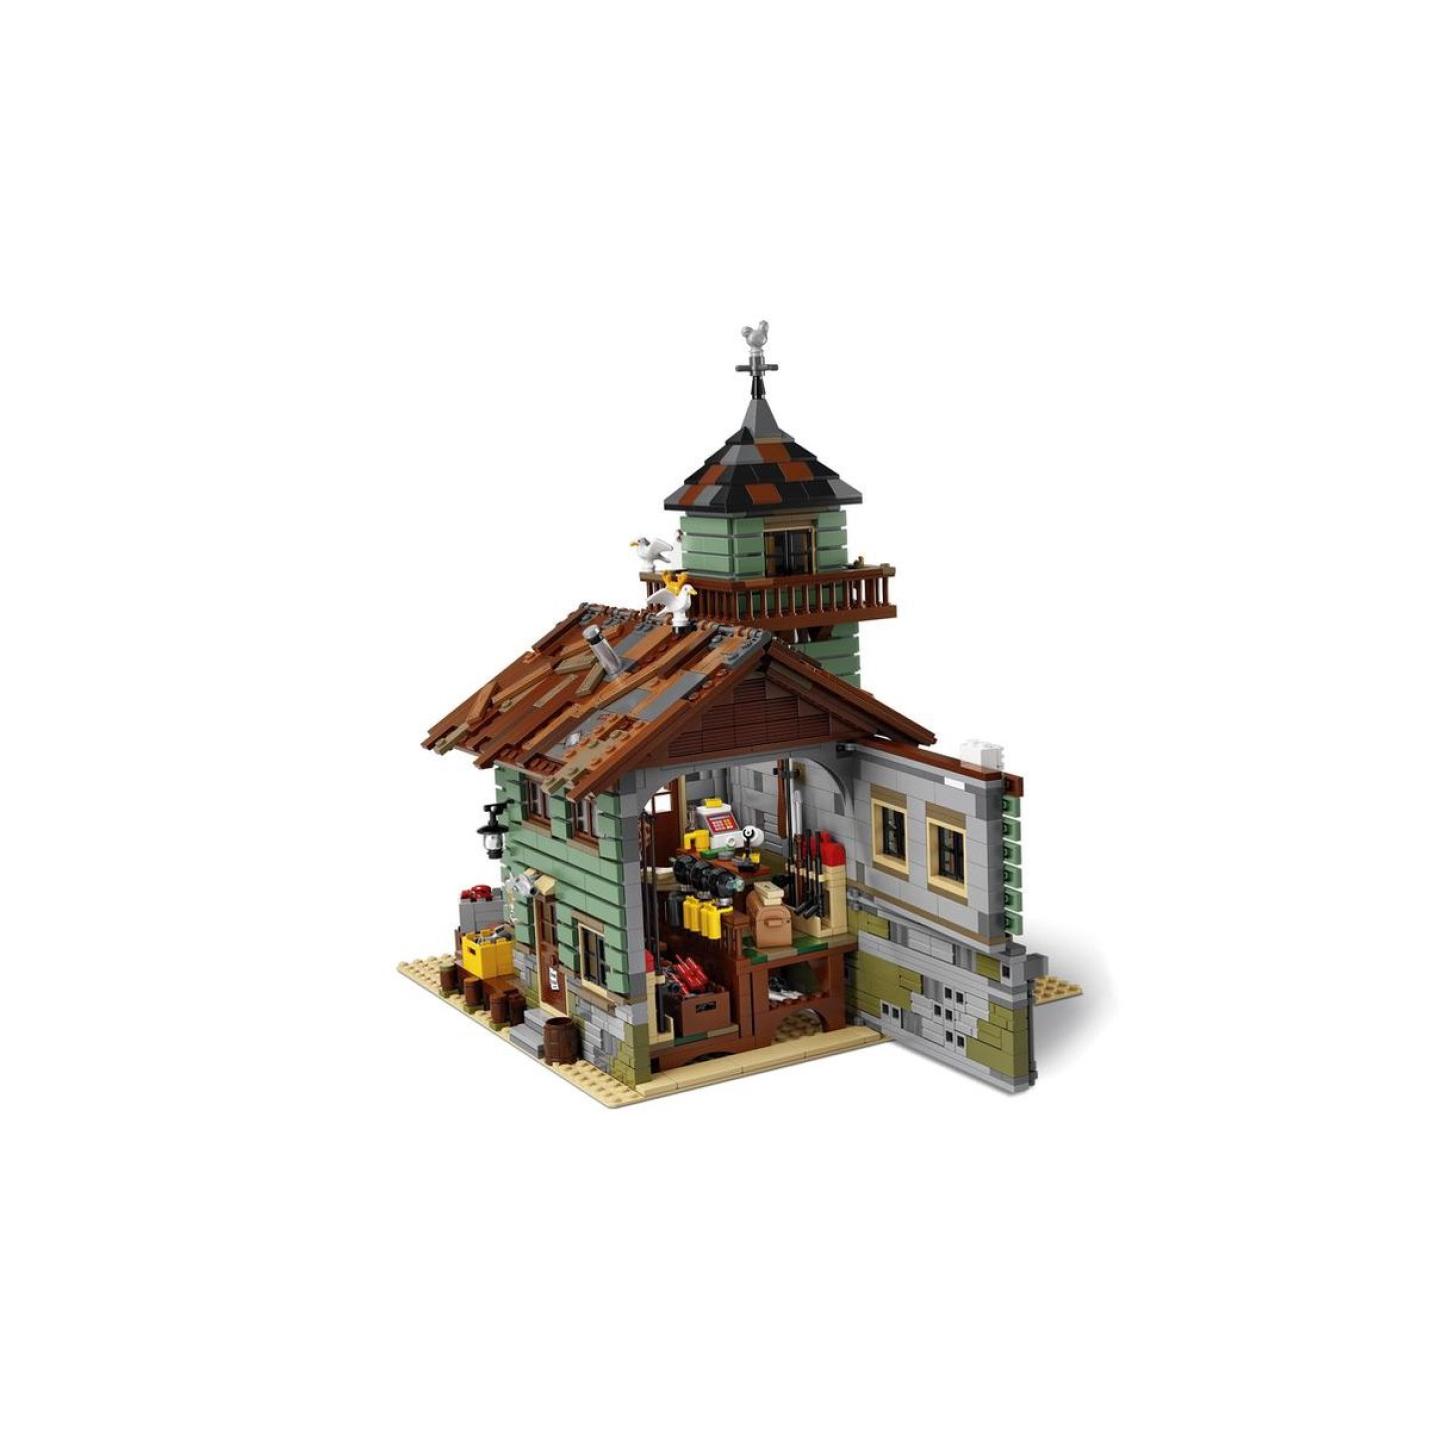 LEGO Ideas Old Fishing Store - 21310 3